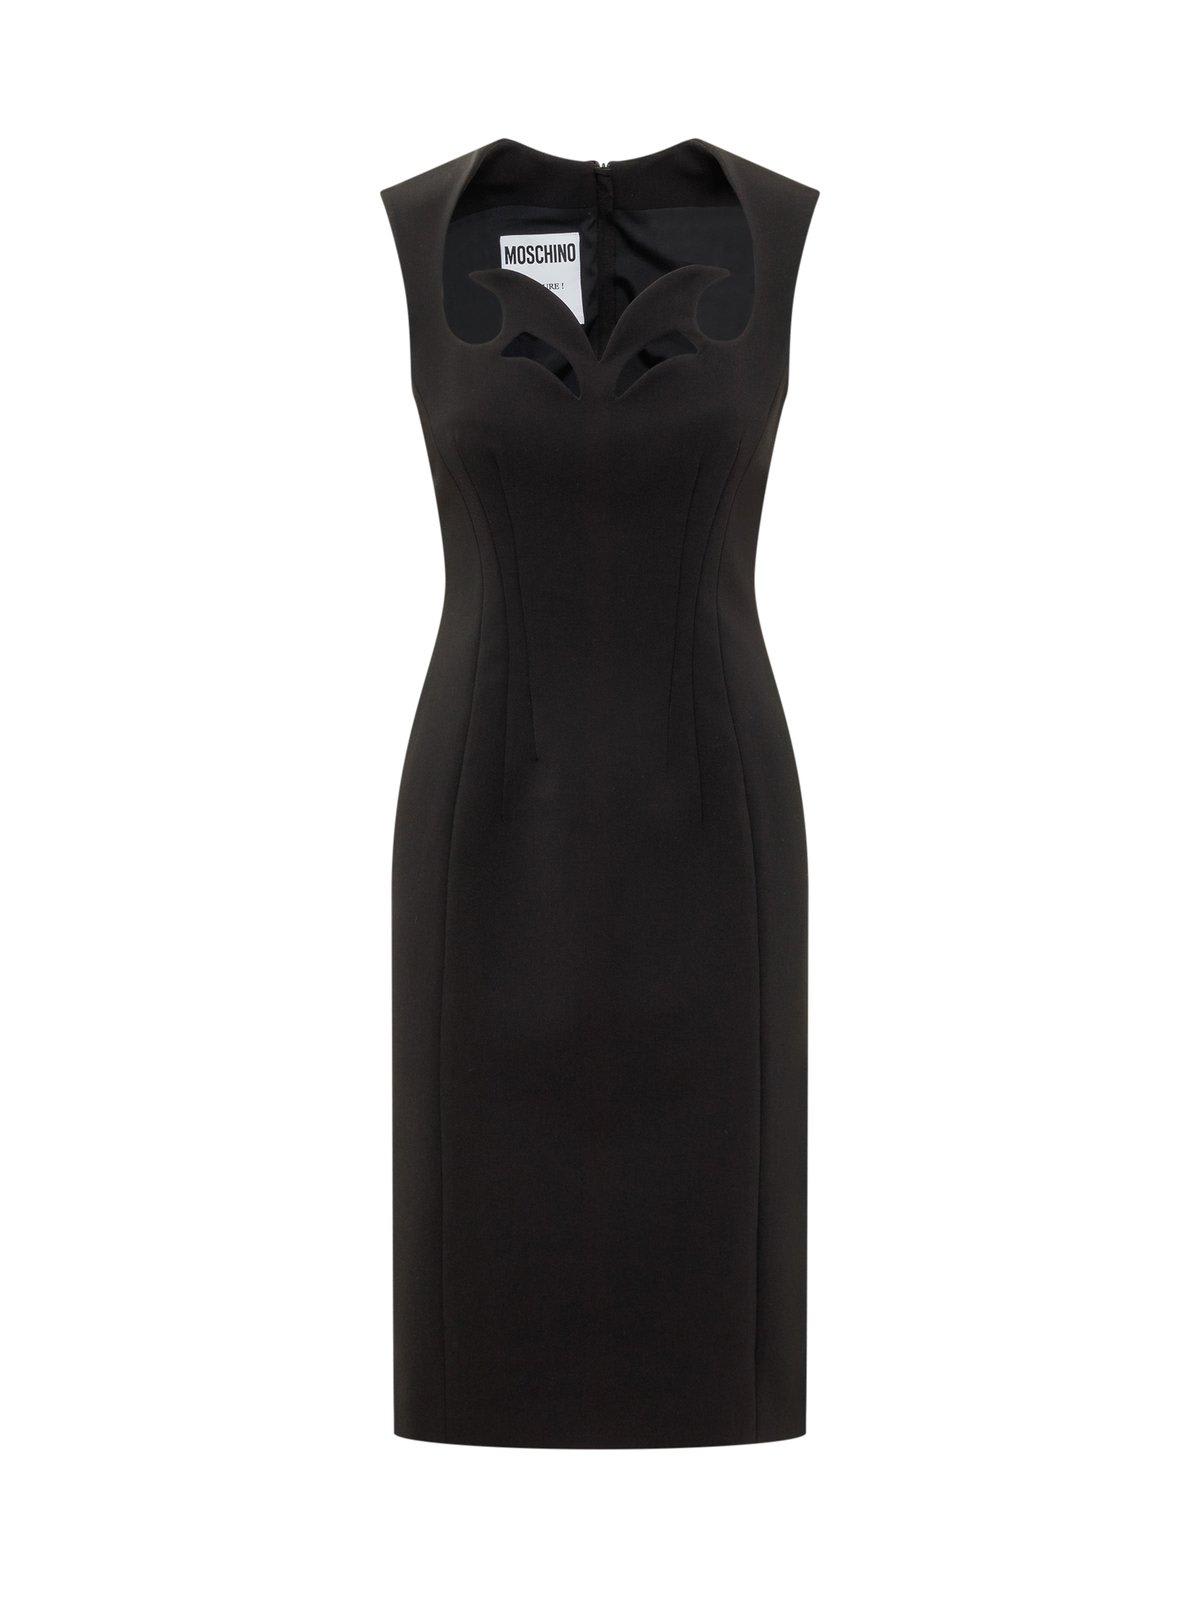 Moschino Cut-out Detailed Knee-length Dress